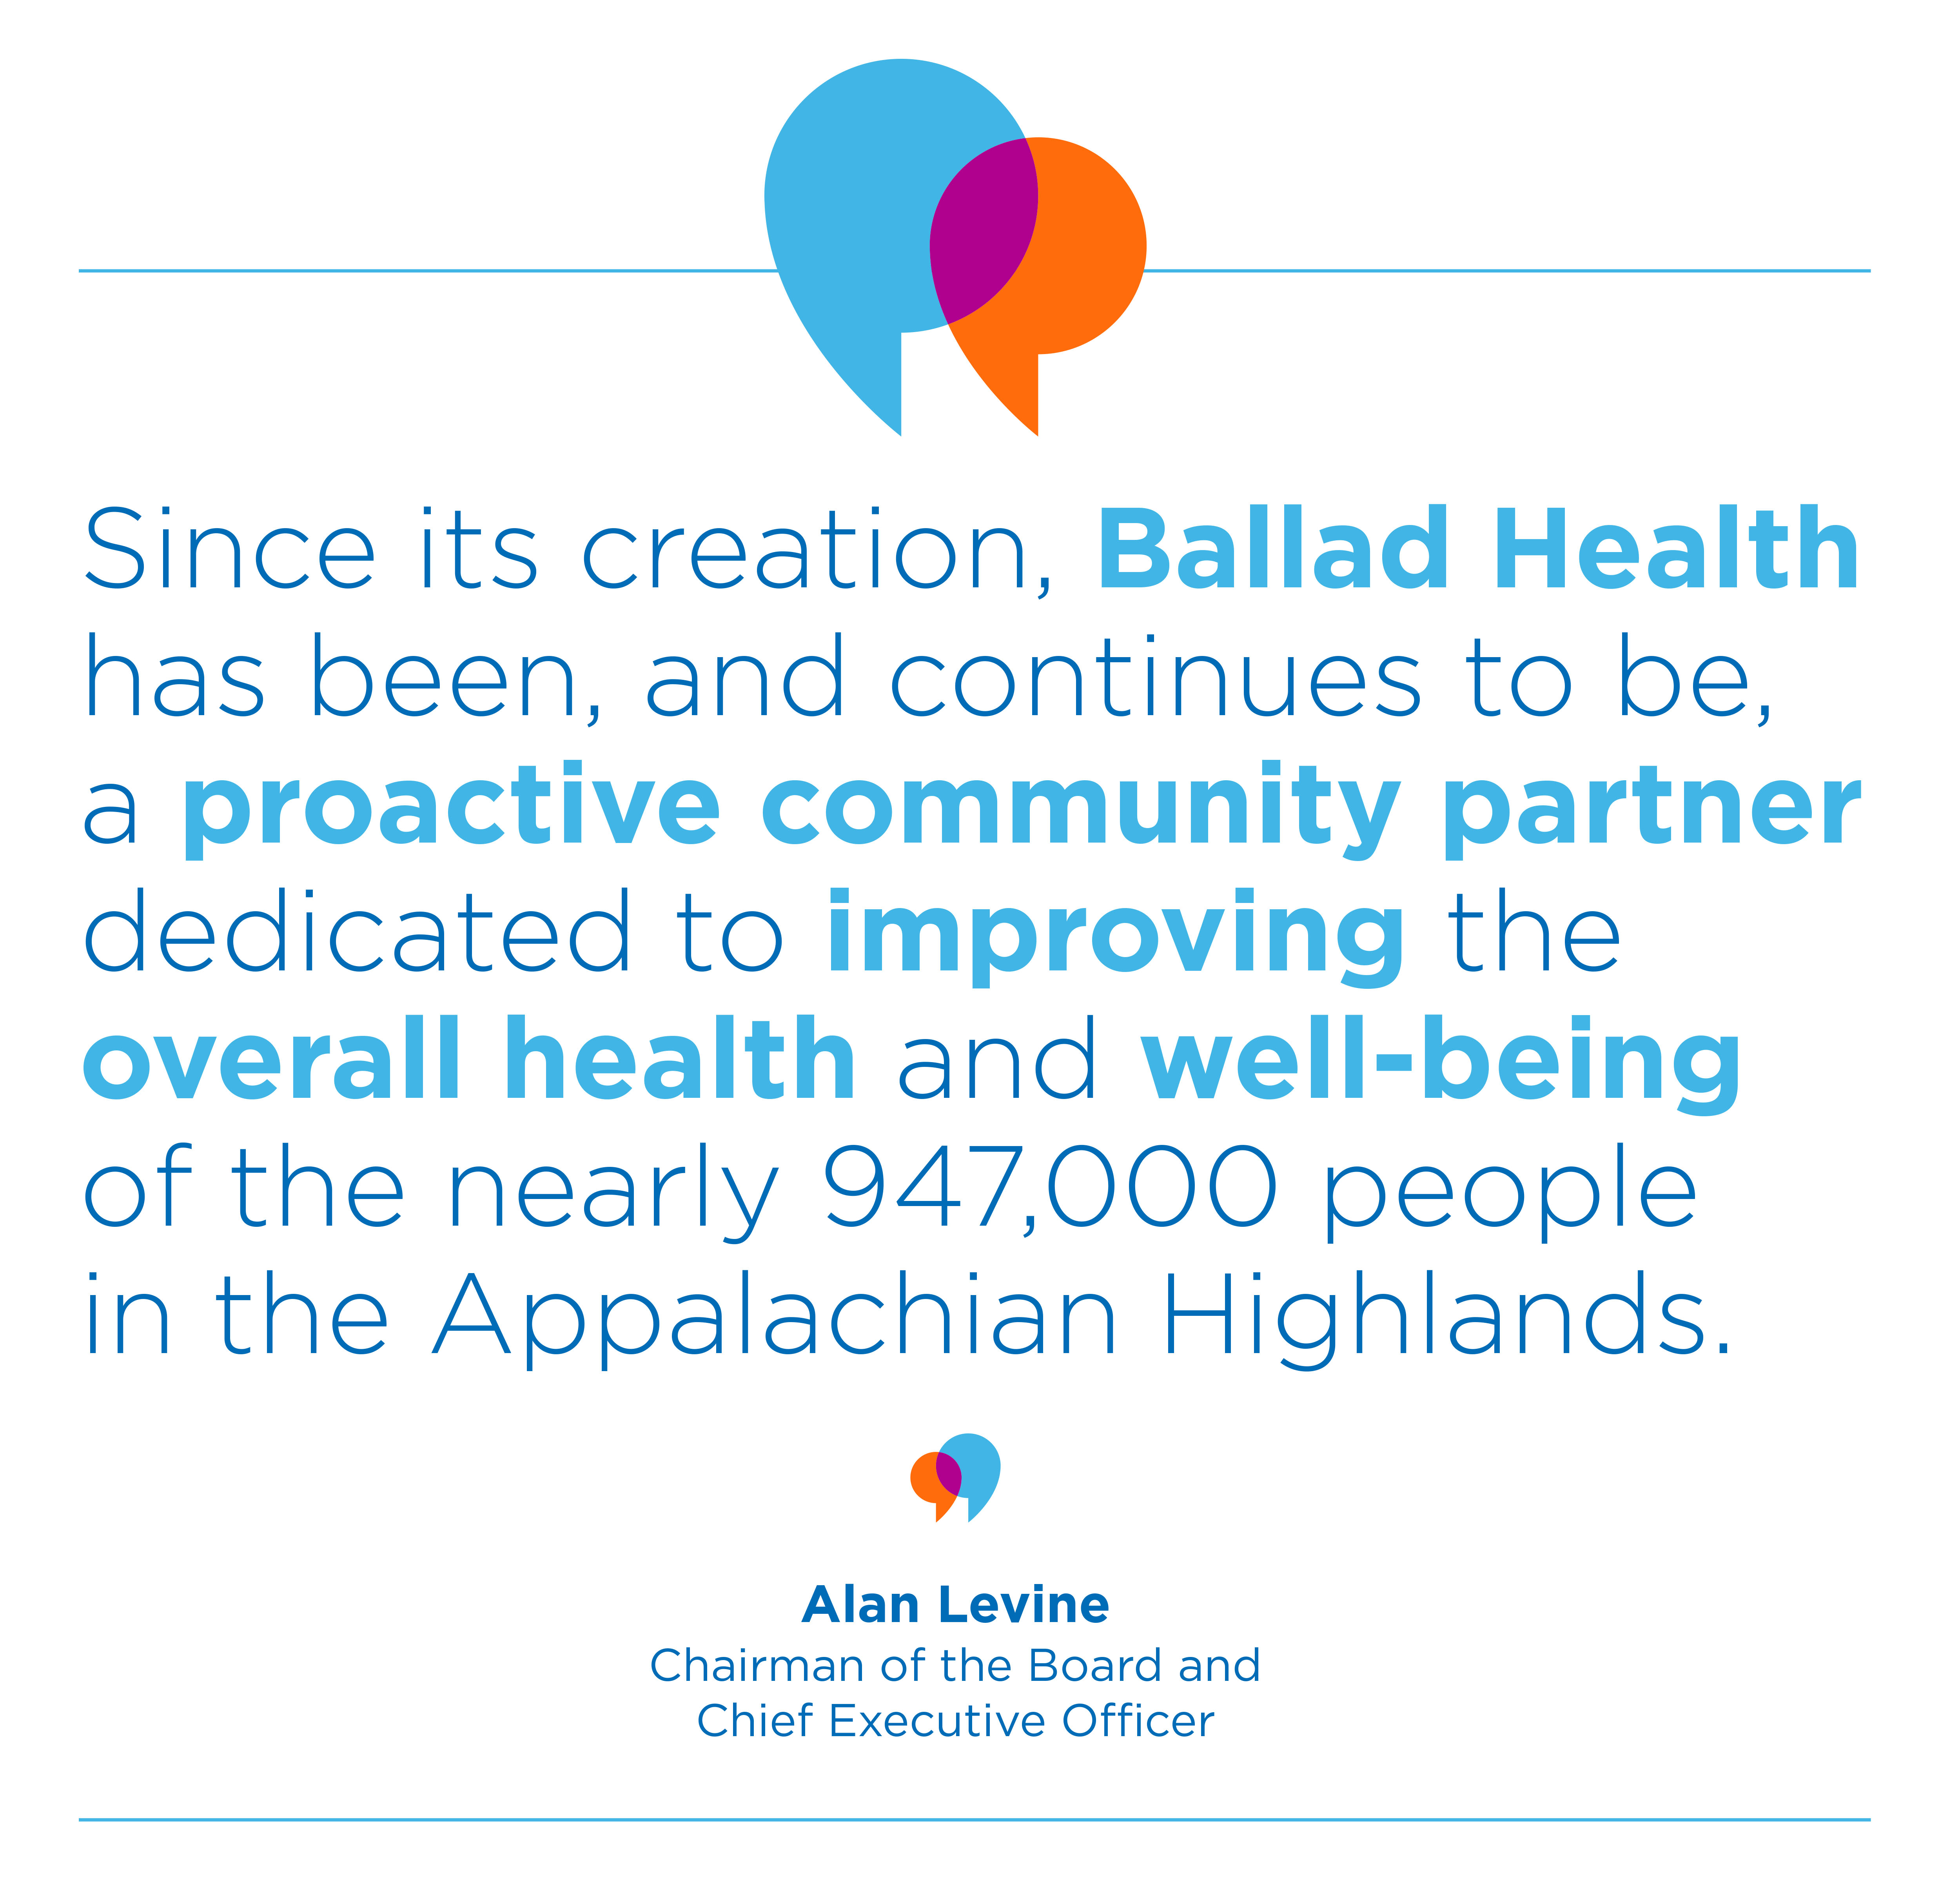 Quote: "Since its creation, Ballad Health has been, and continues to be, a proactive community partner dedicated to improving the overall health and well-being of the nearly 947,000 people in the Appalachian Highlands." Alan Levine, chairman and CEO